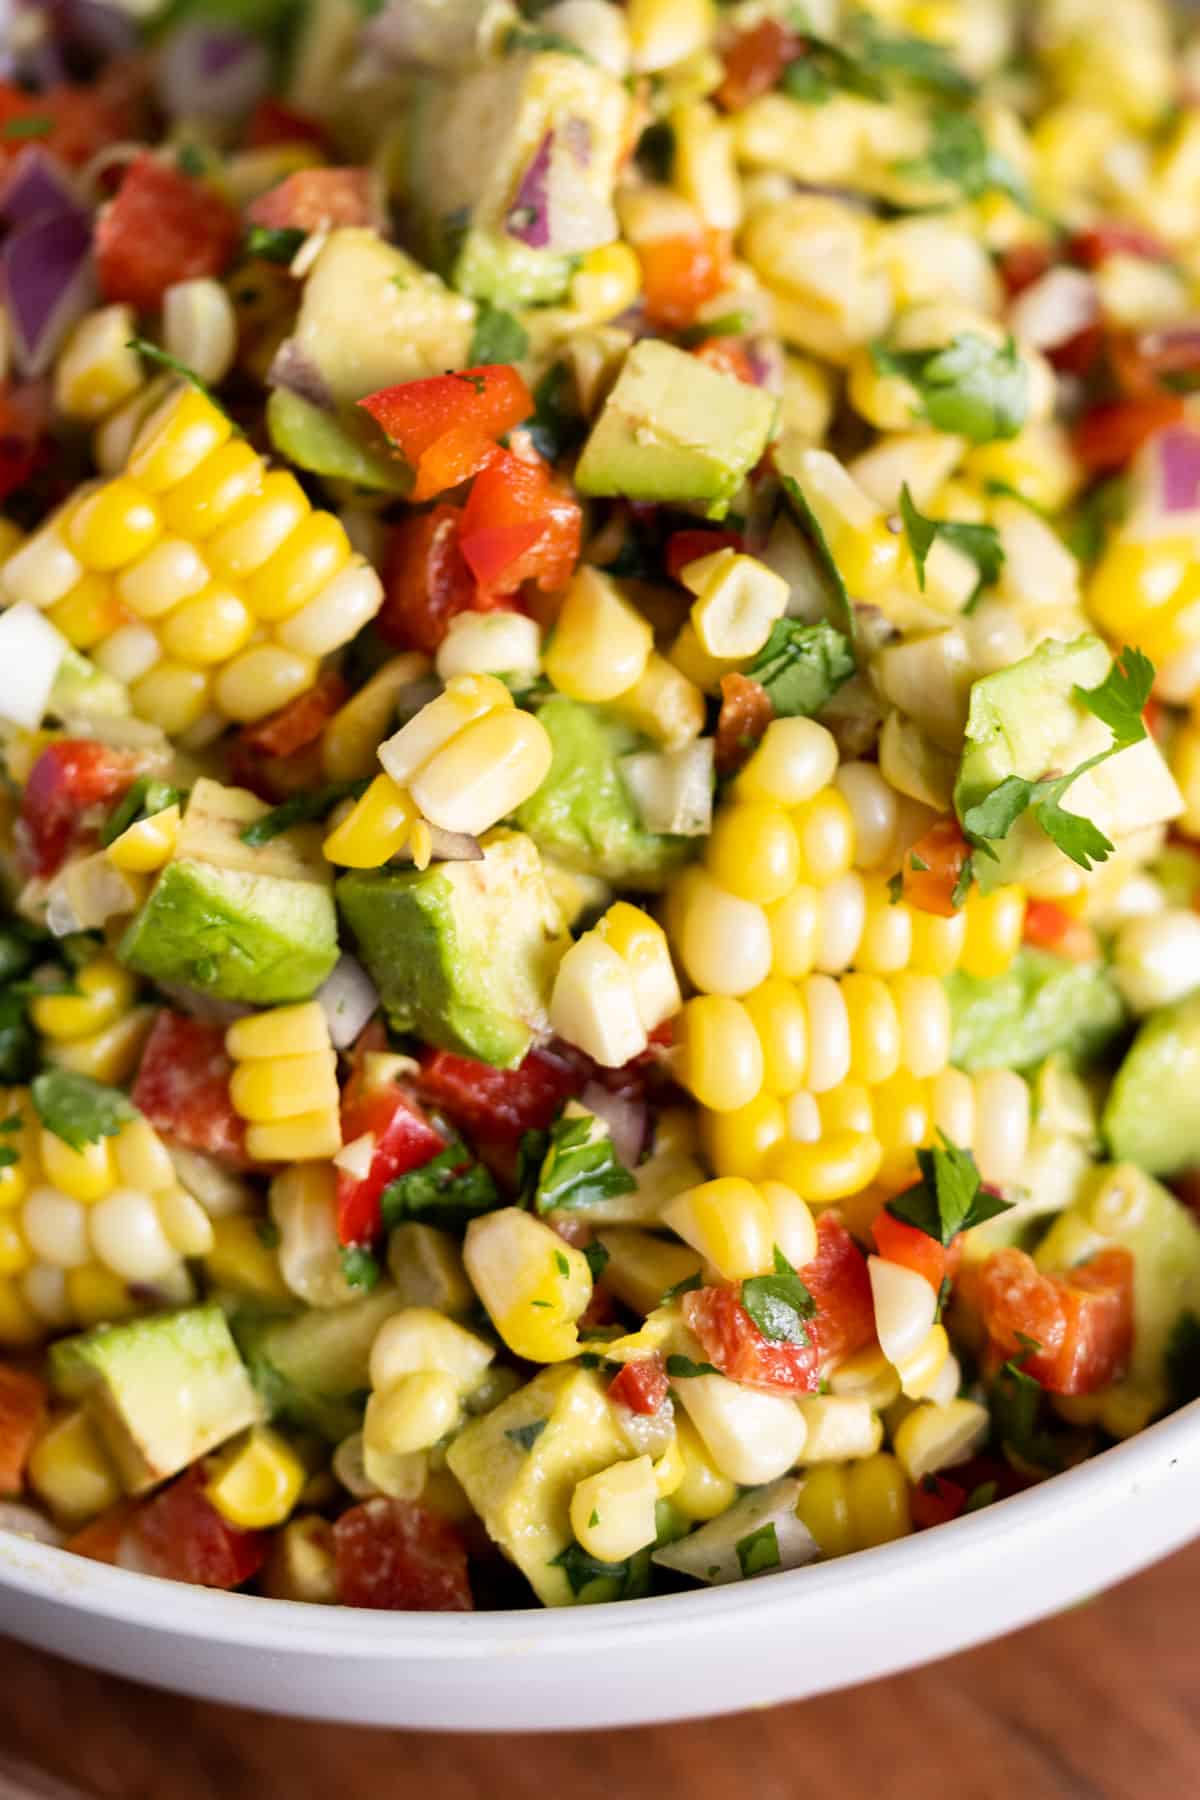 Avocado corn salad with red peppers in a bowl.